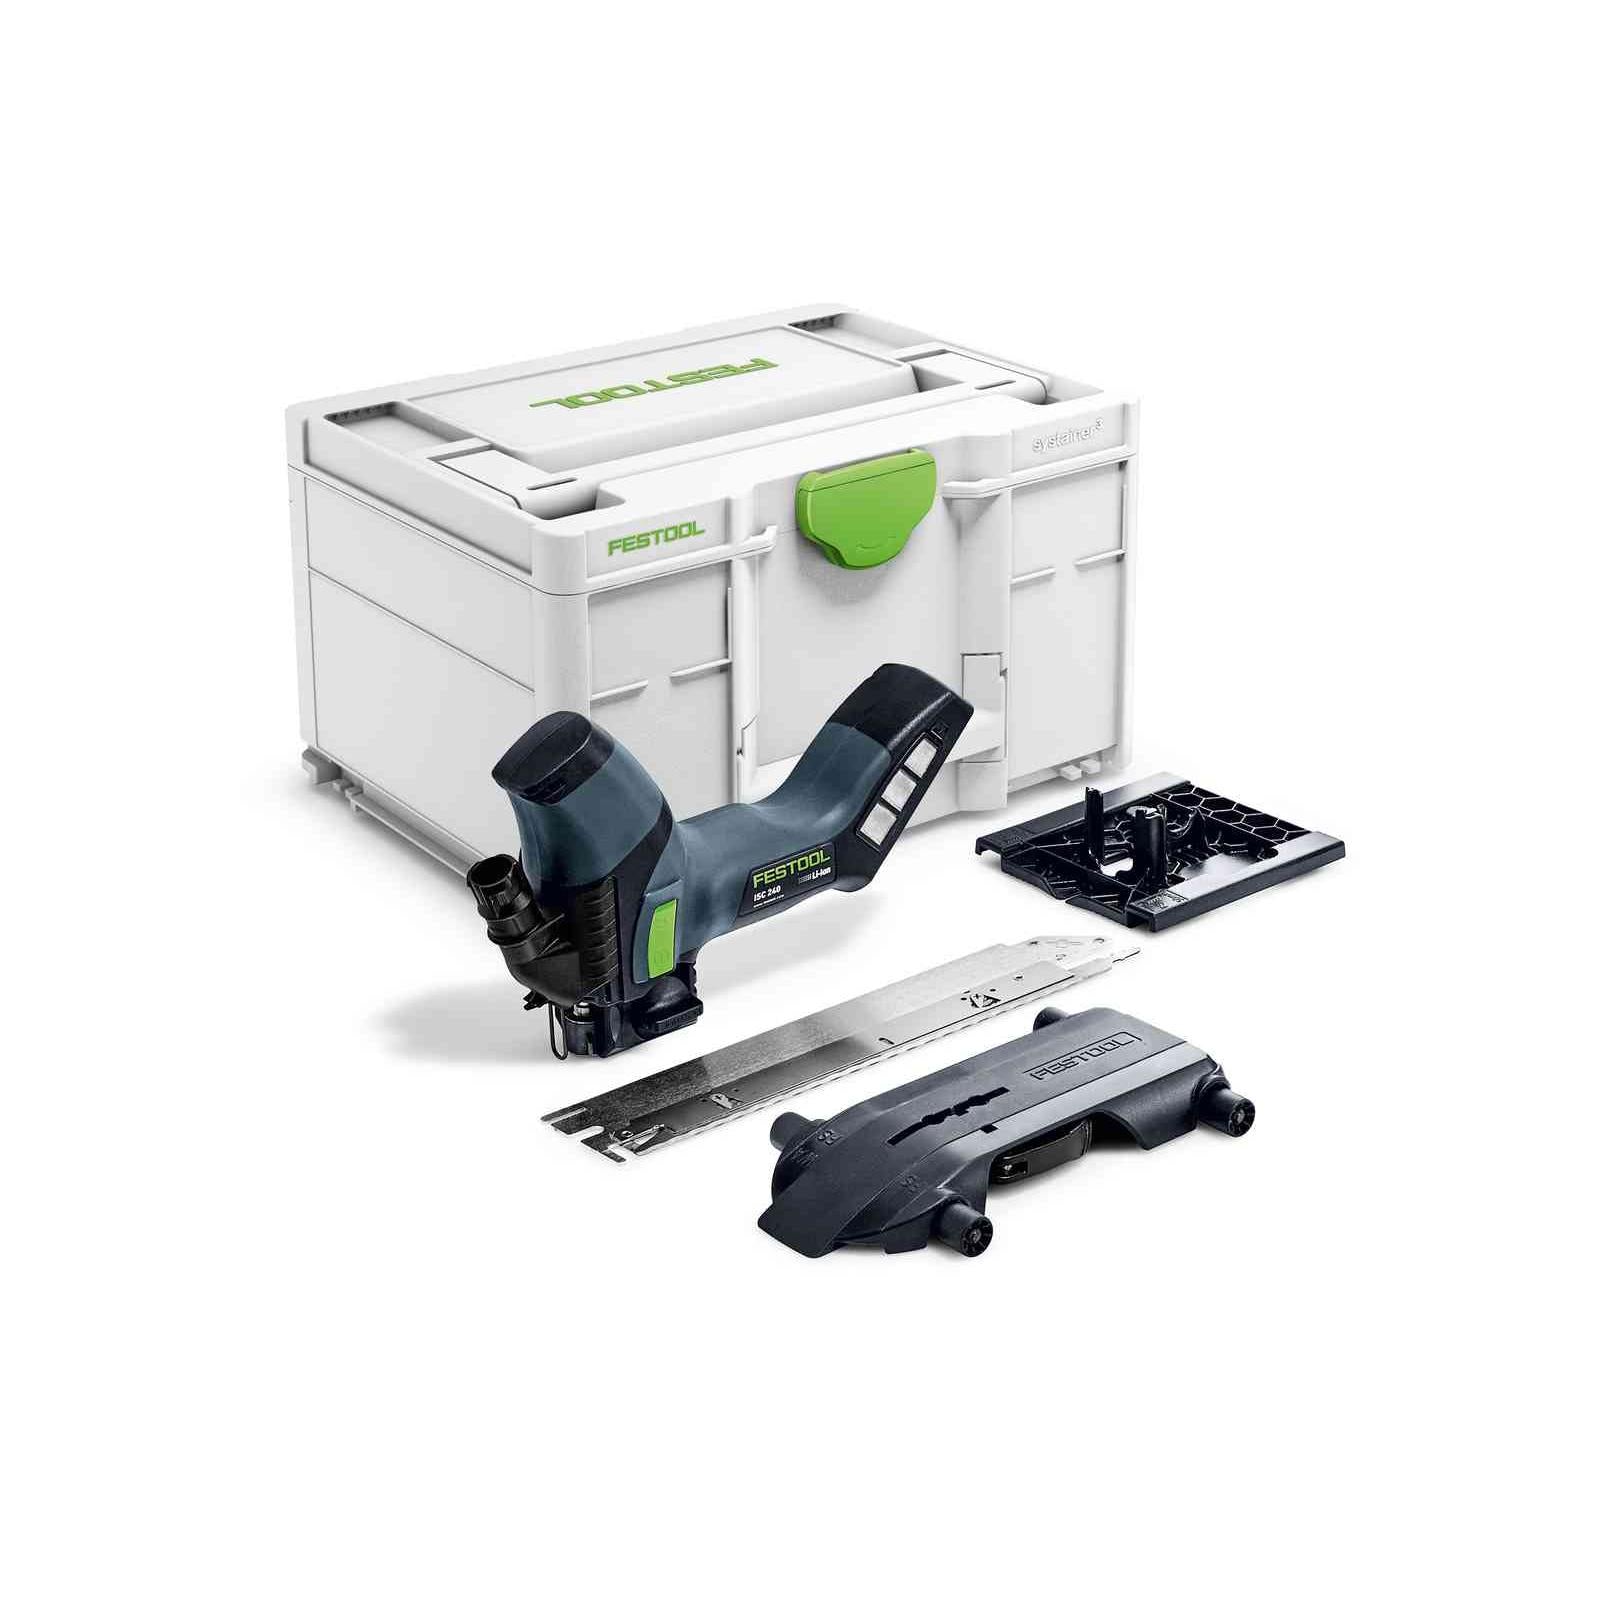 Festool Cordless insulating-material saw ISC 240 EB-Basic 576571 Power Tool Services